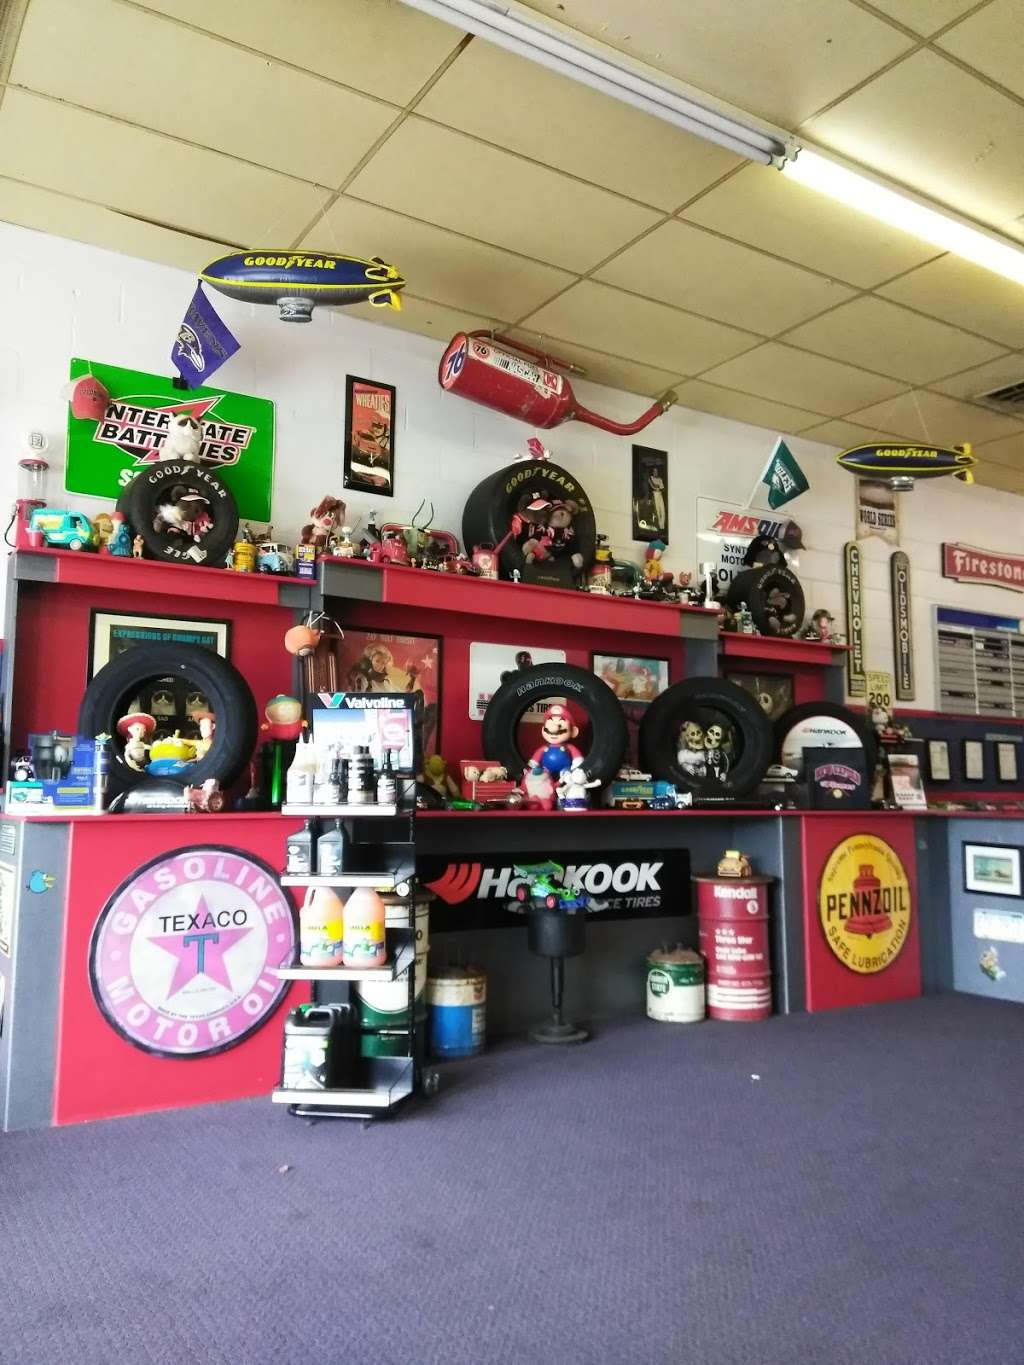 Wolfes New Oxford Auto Center | 330 Lincoln Way E, New Oxford, PA 17350, USA | Phone: (717) 624-7306